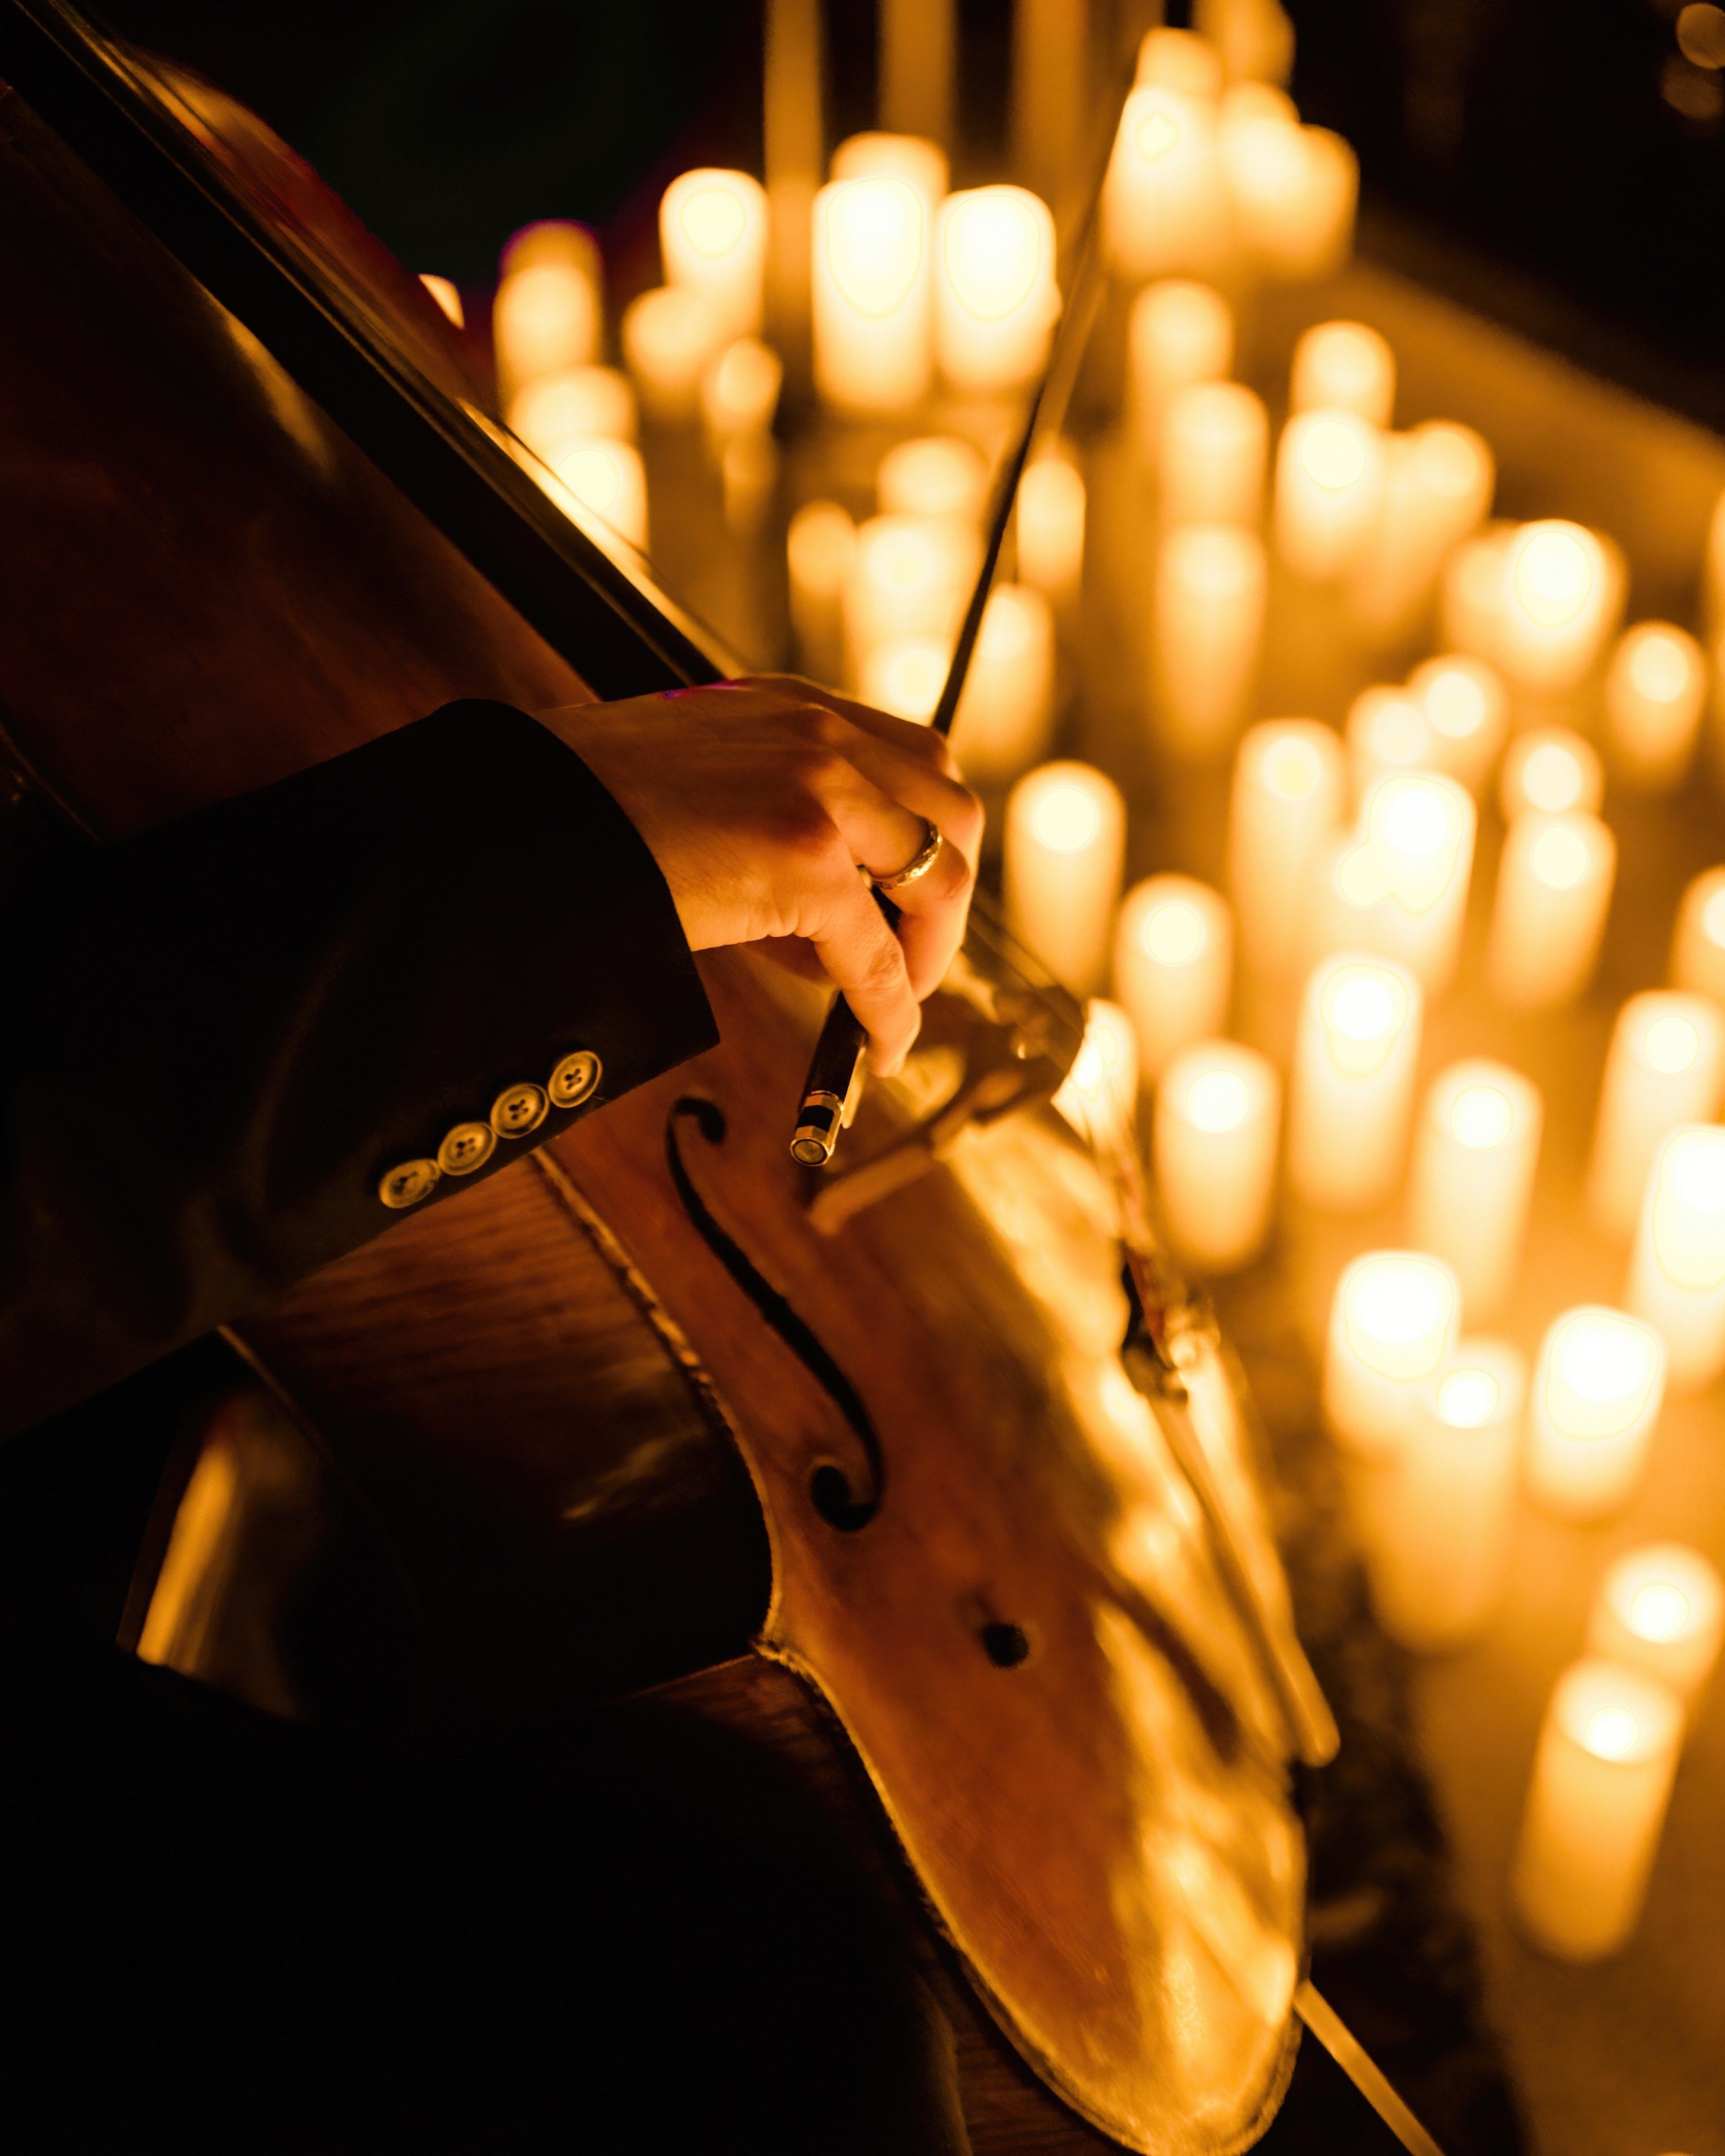 Grand Rapids Fountain Street Church Candlelight Concert Performance - Photographed for Fever by Ryan Inman - 32.jpg